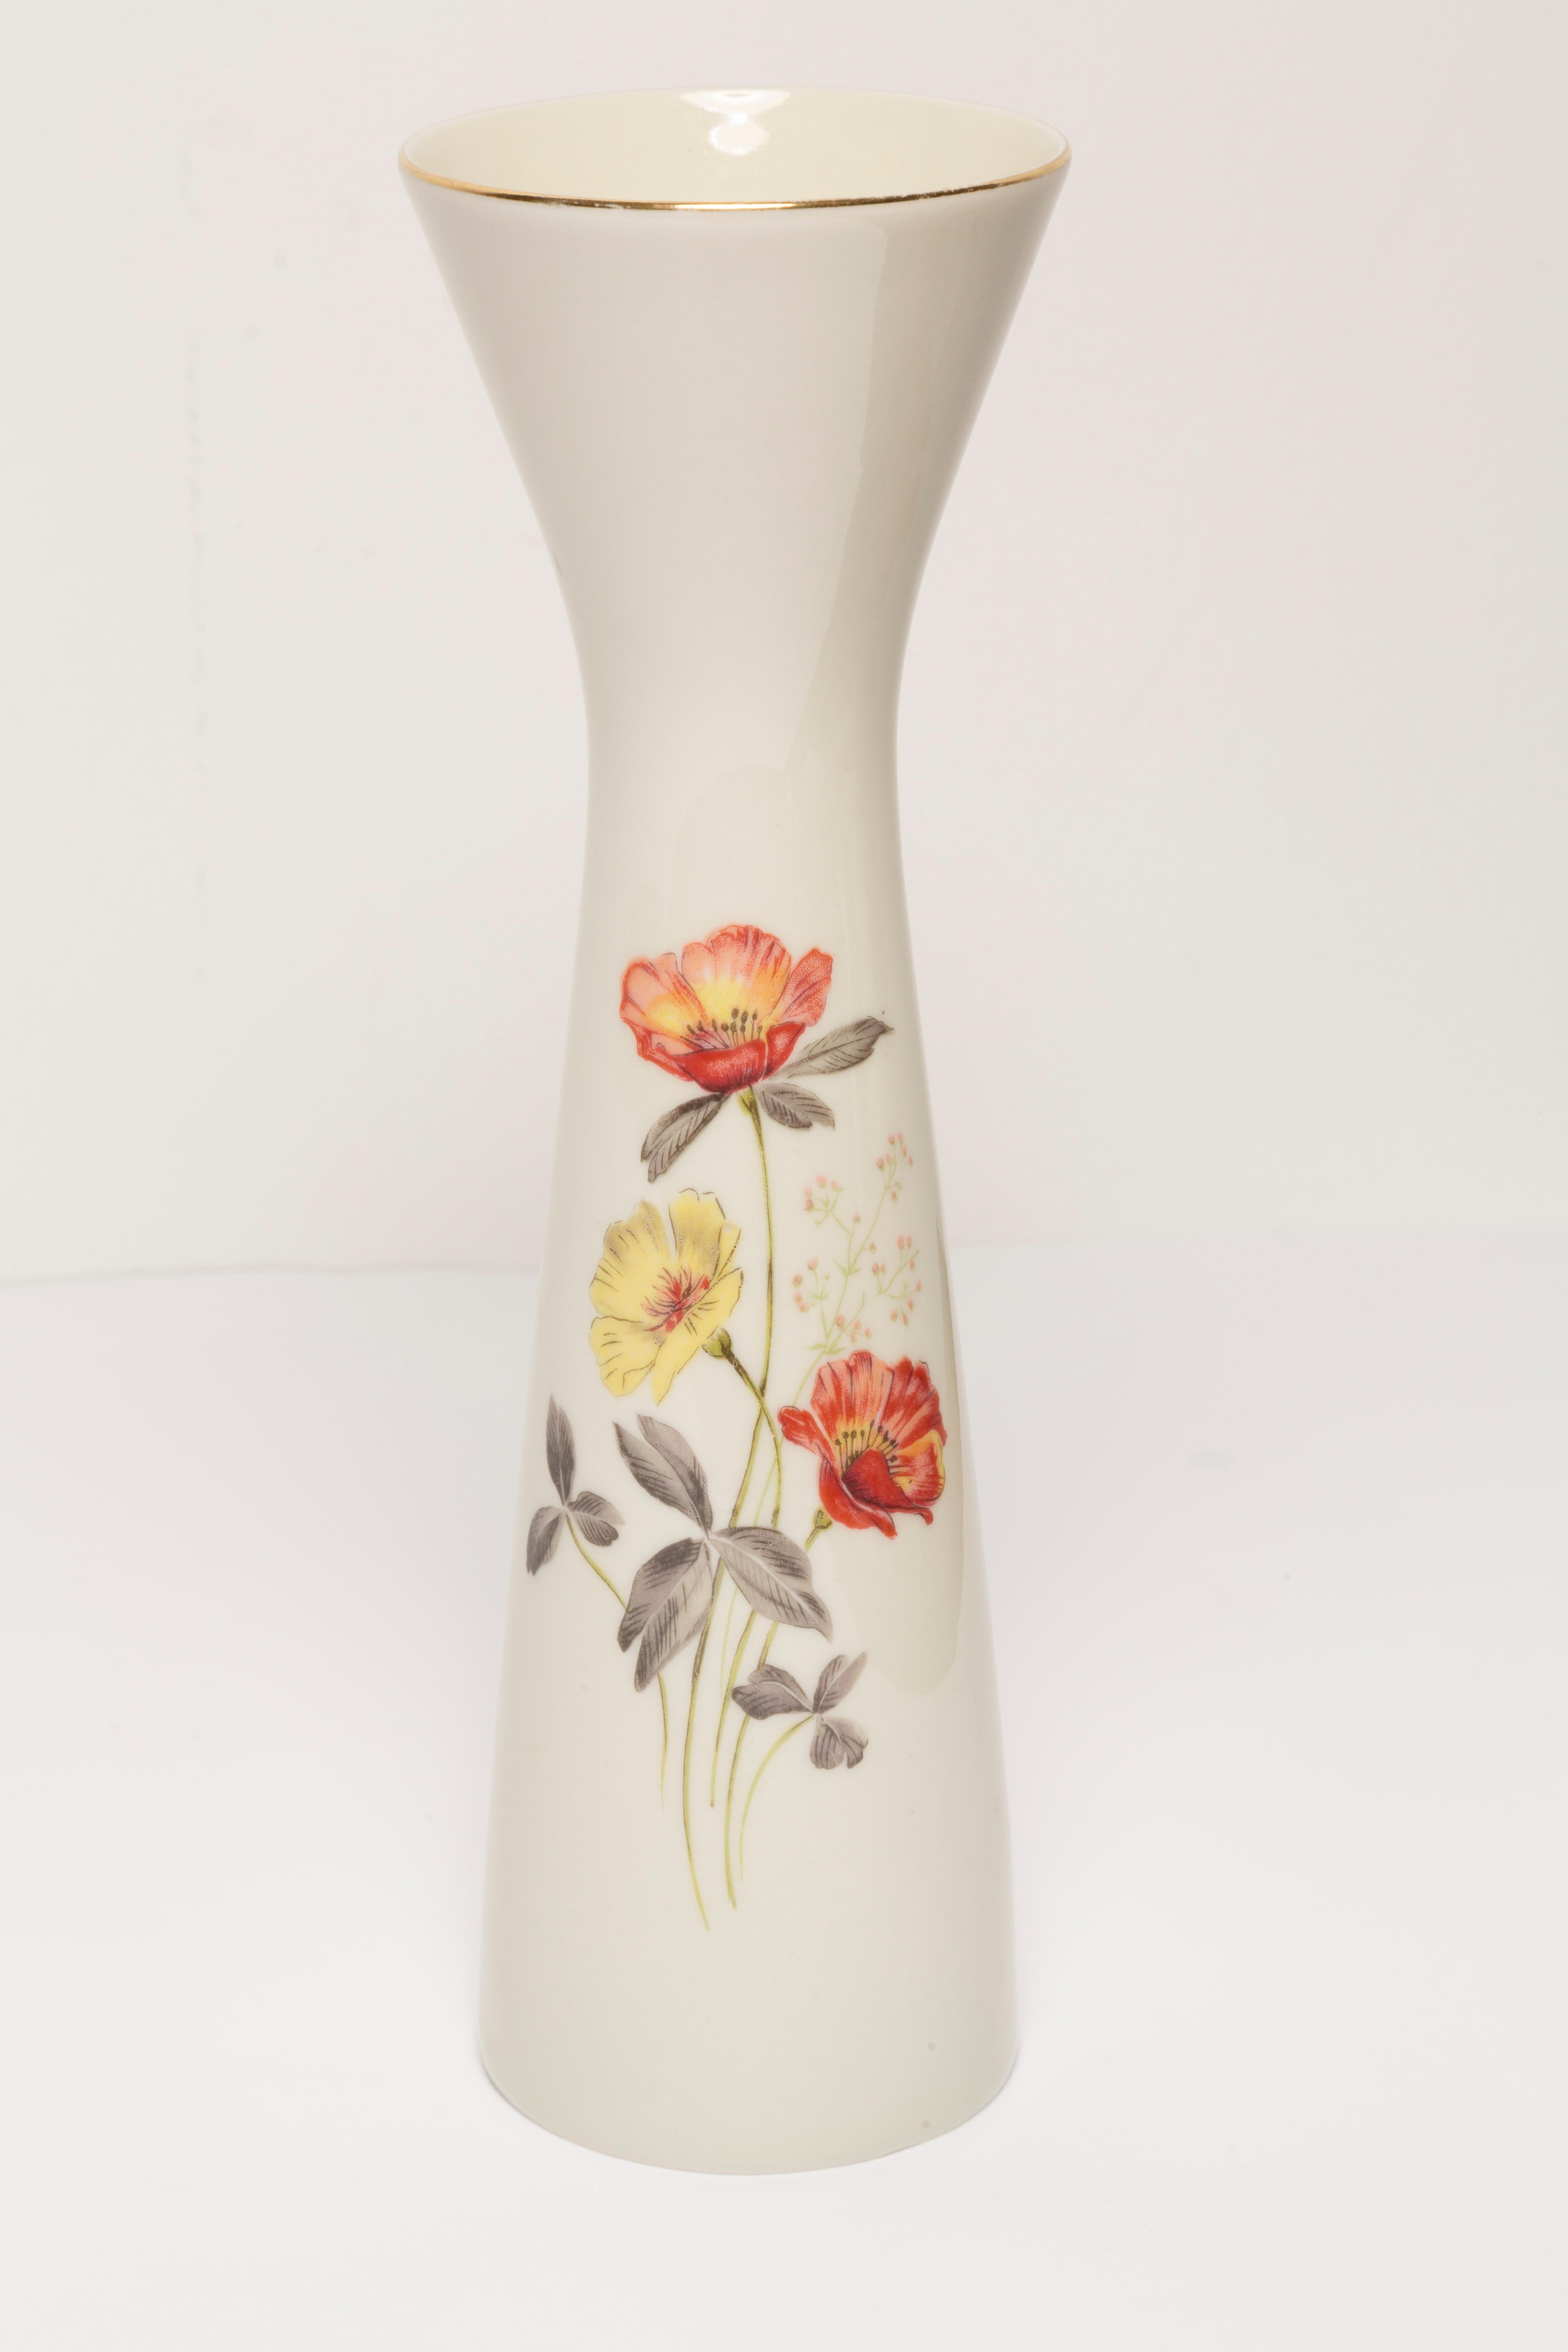 Midcentury Porcelain White Mini Vase with Roses, Hand Painted, Europe, 1960s For Sale 1